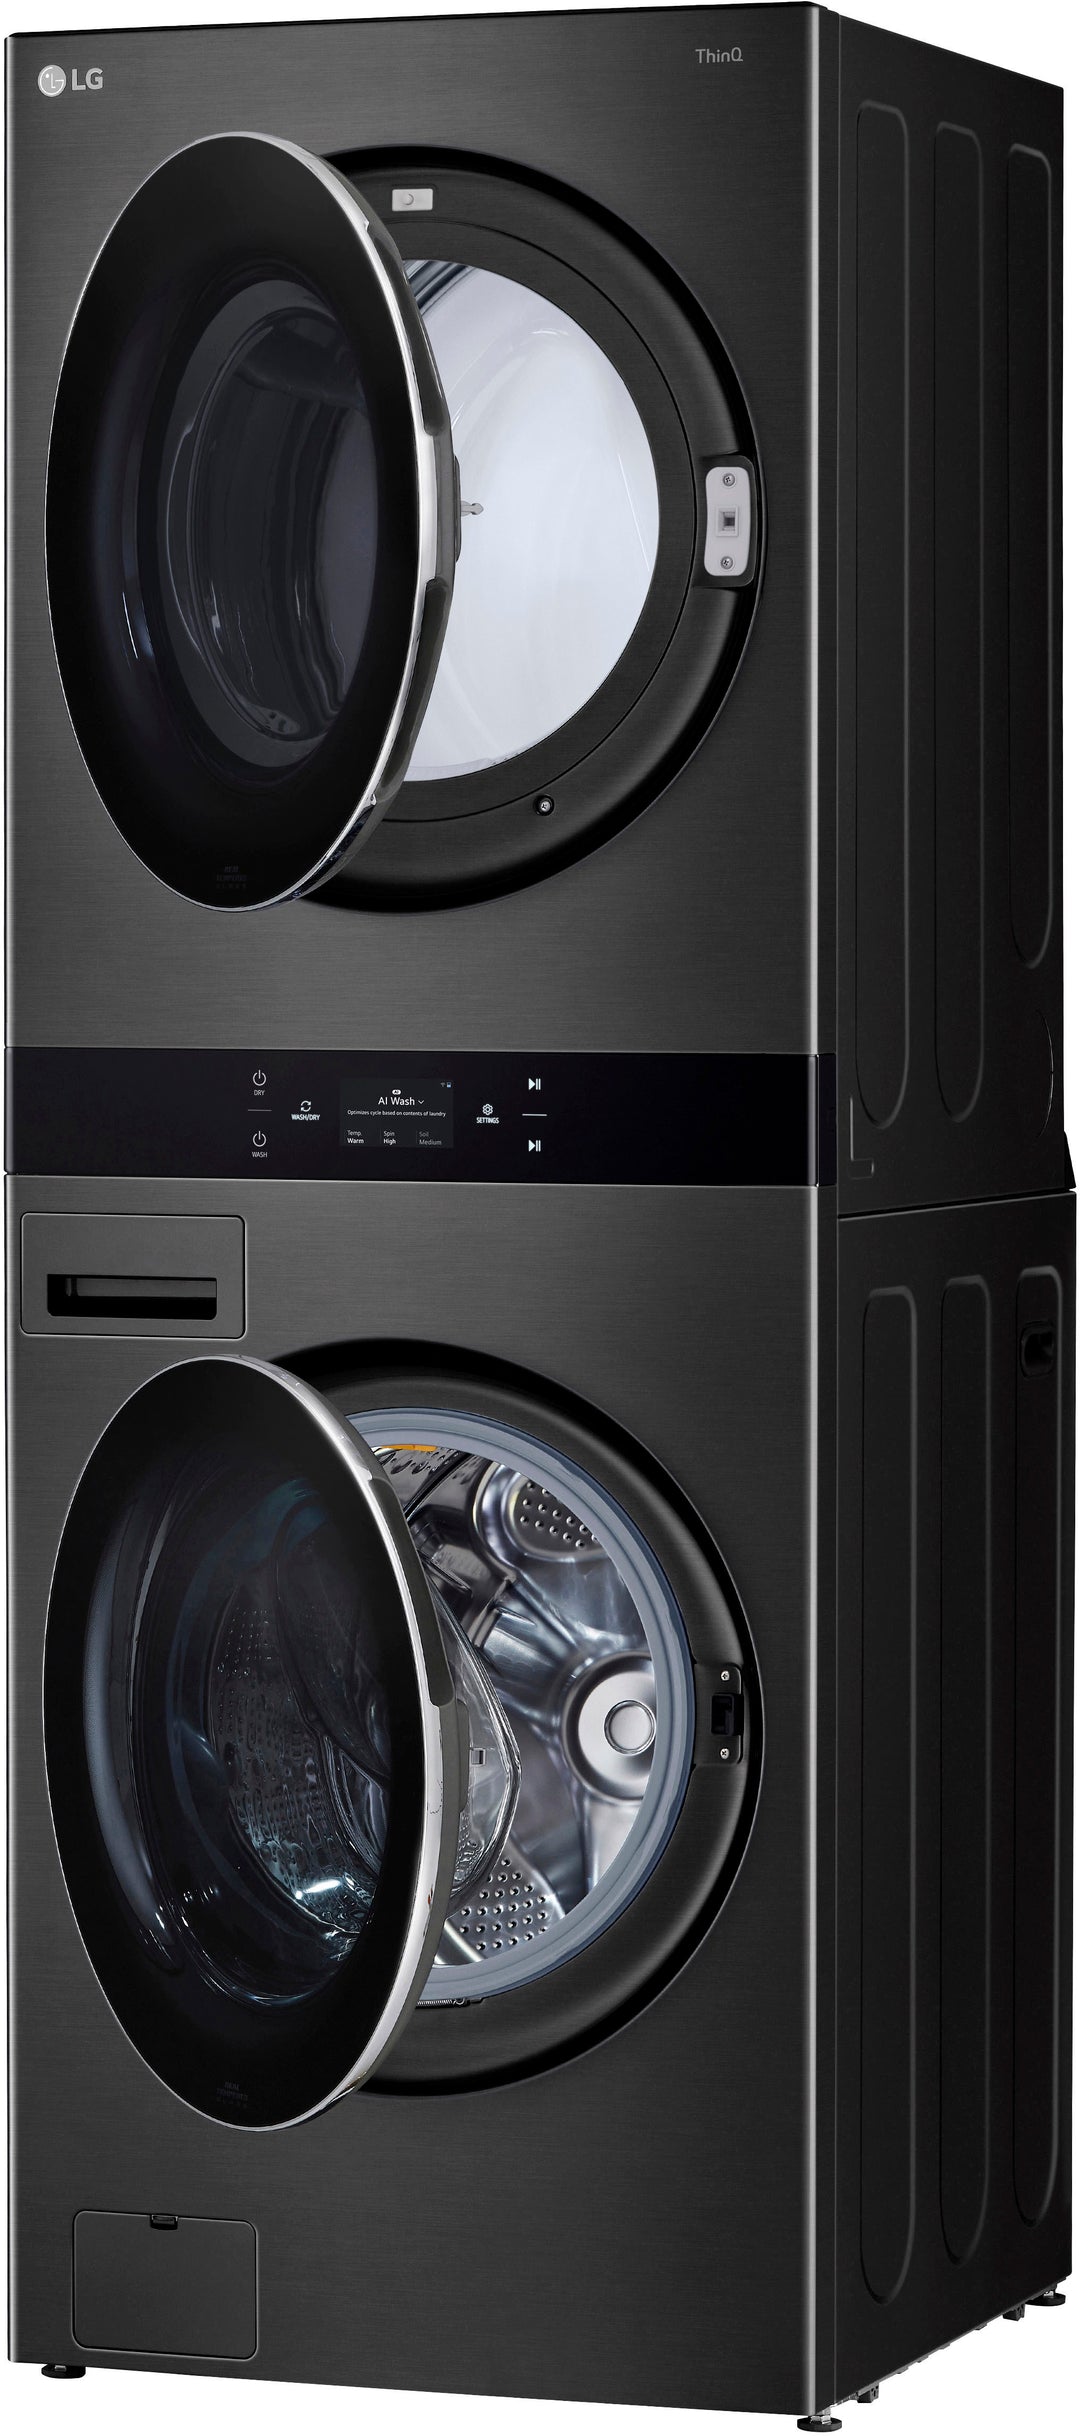 LG - 5.0 Cu. Ft. HE Smart Front Load Washer and 7.4 Cu. Ft. Electric Dryer WashTower with Steam and Center Control - Black Steel_24